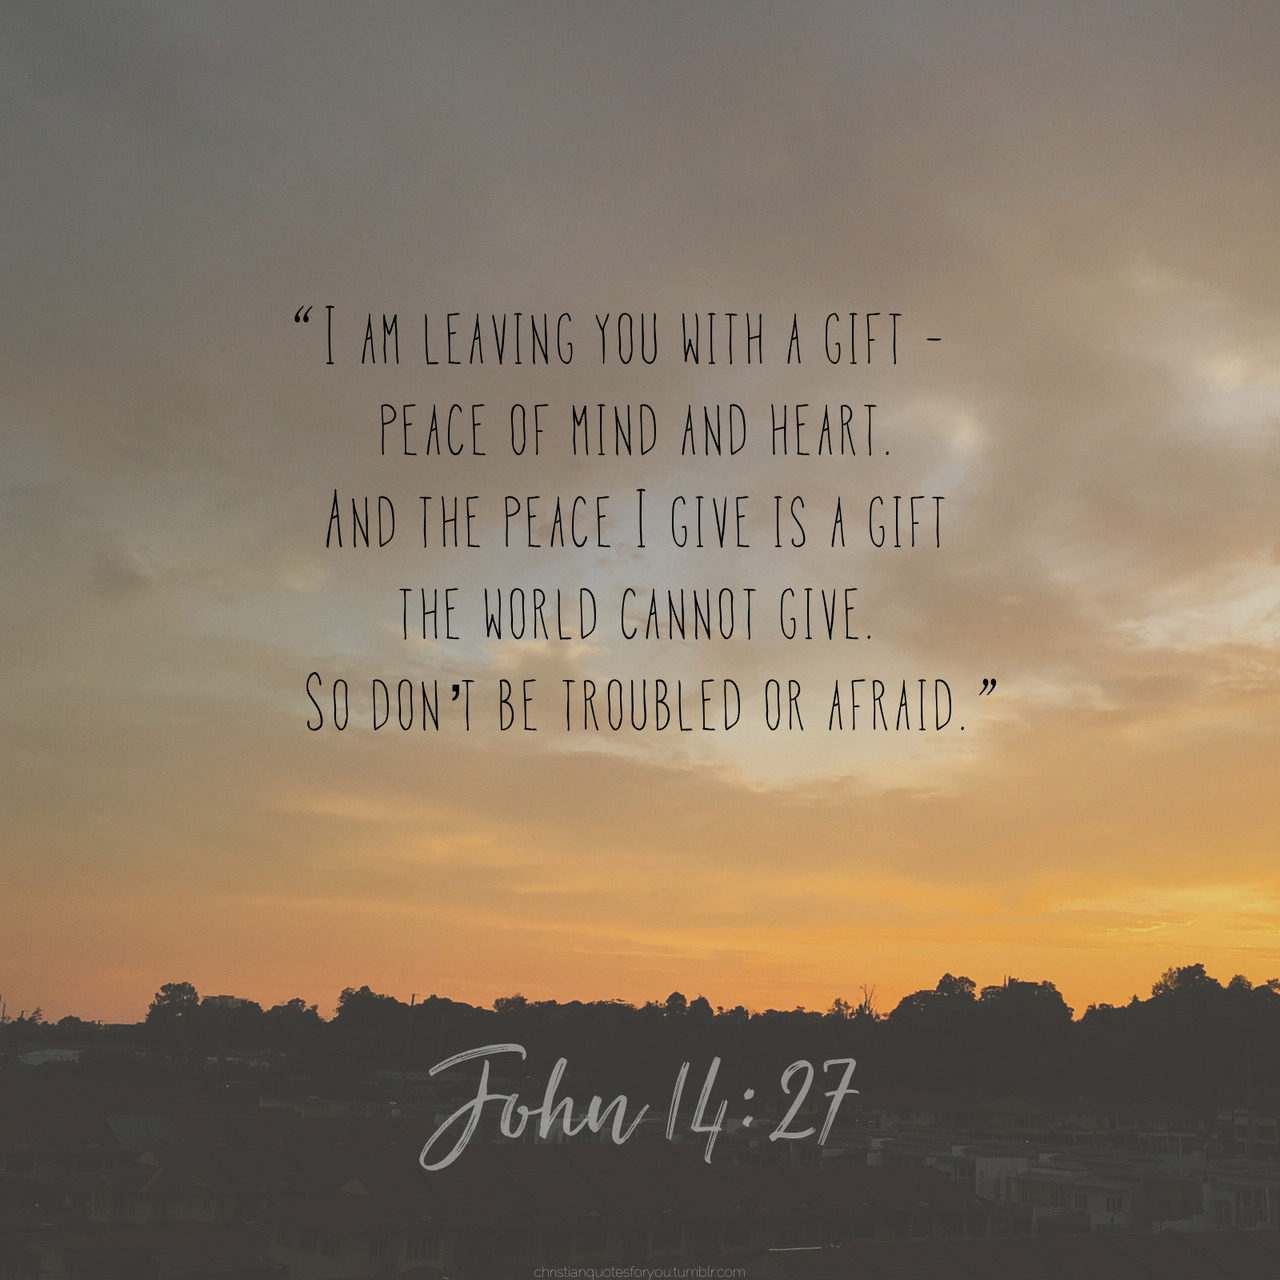 Sunset Quotes Bible Verse